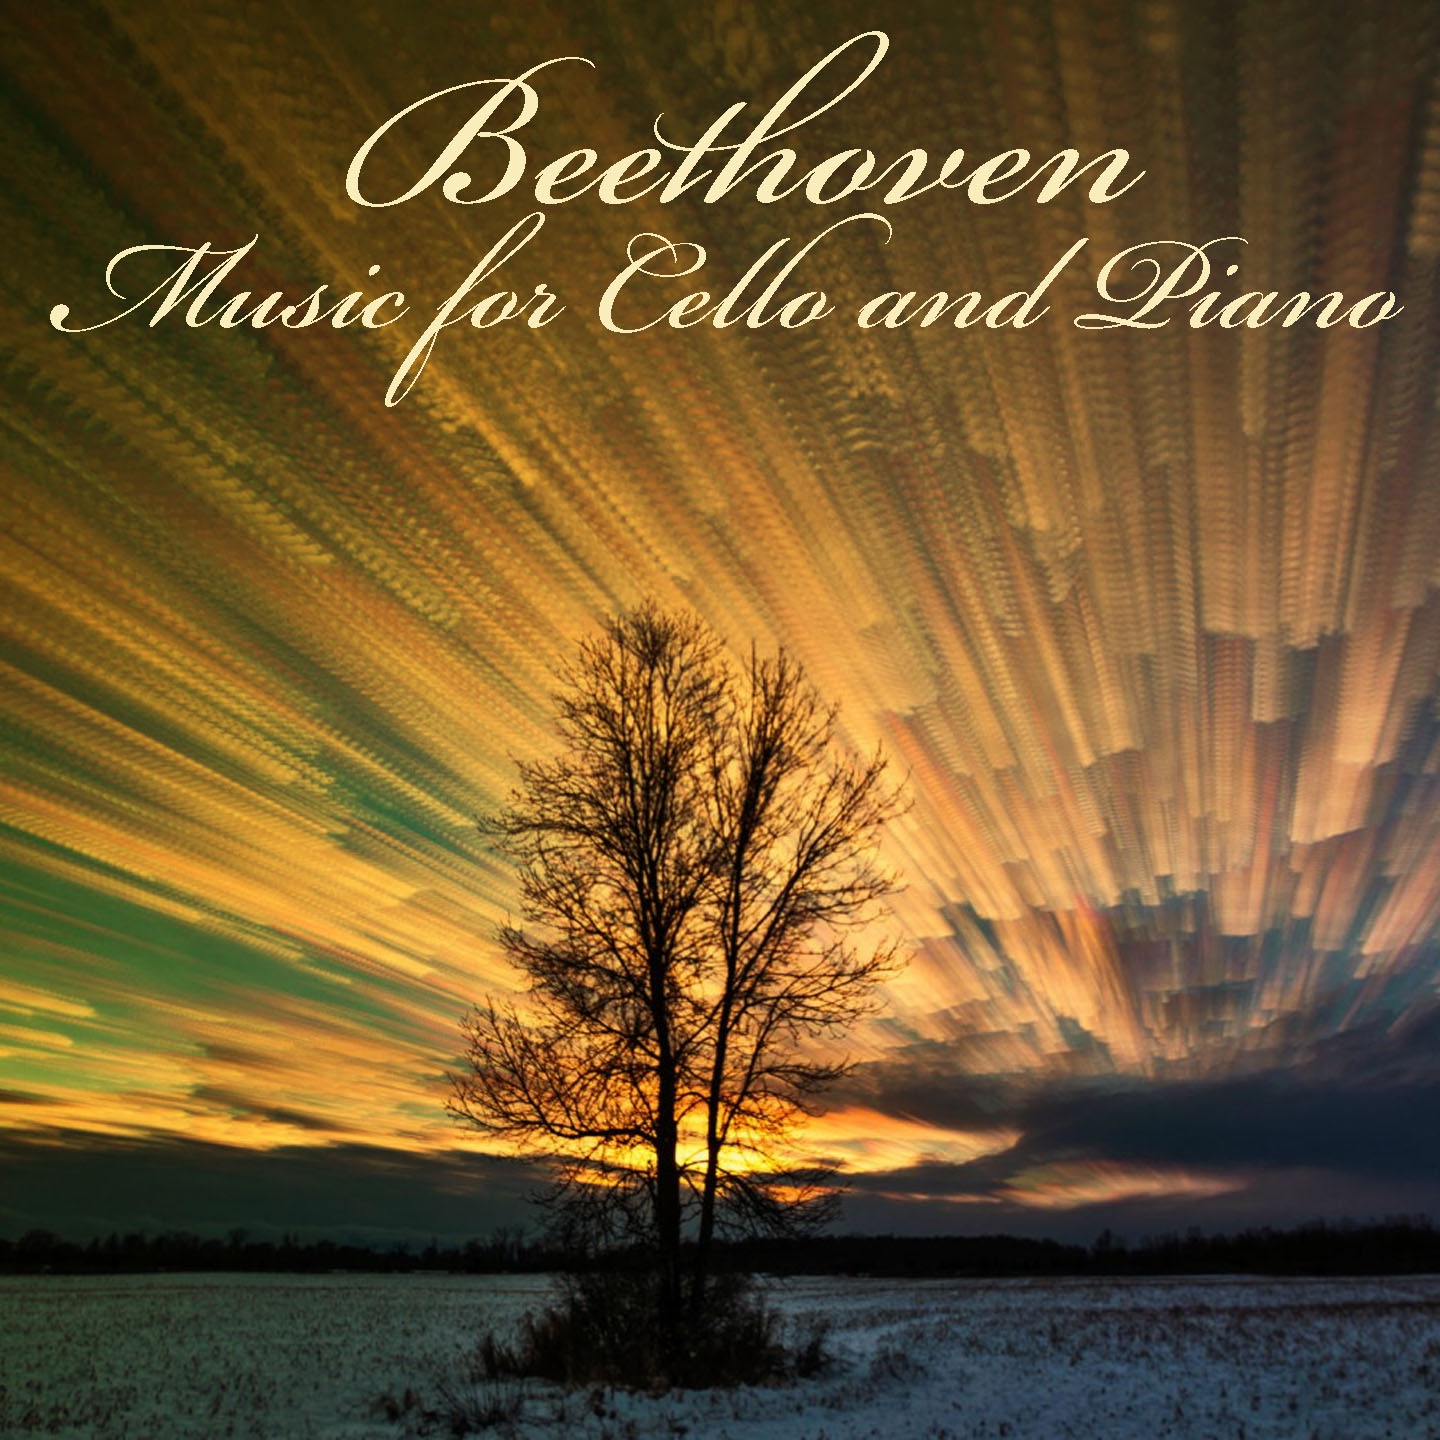 Beethoven: Music for Cello and Piano